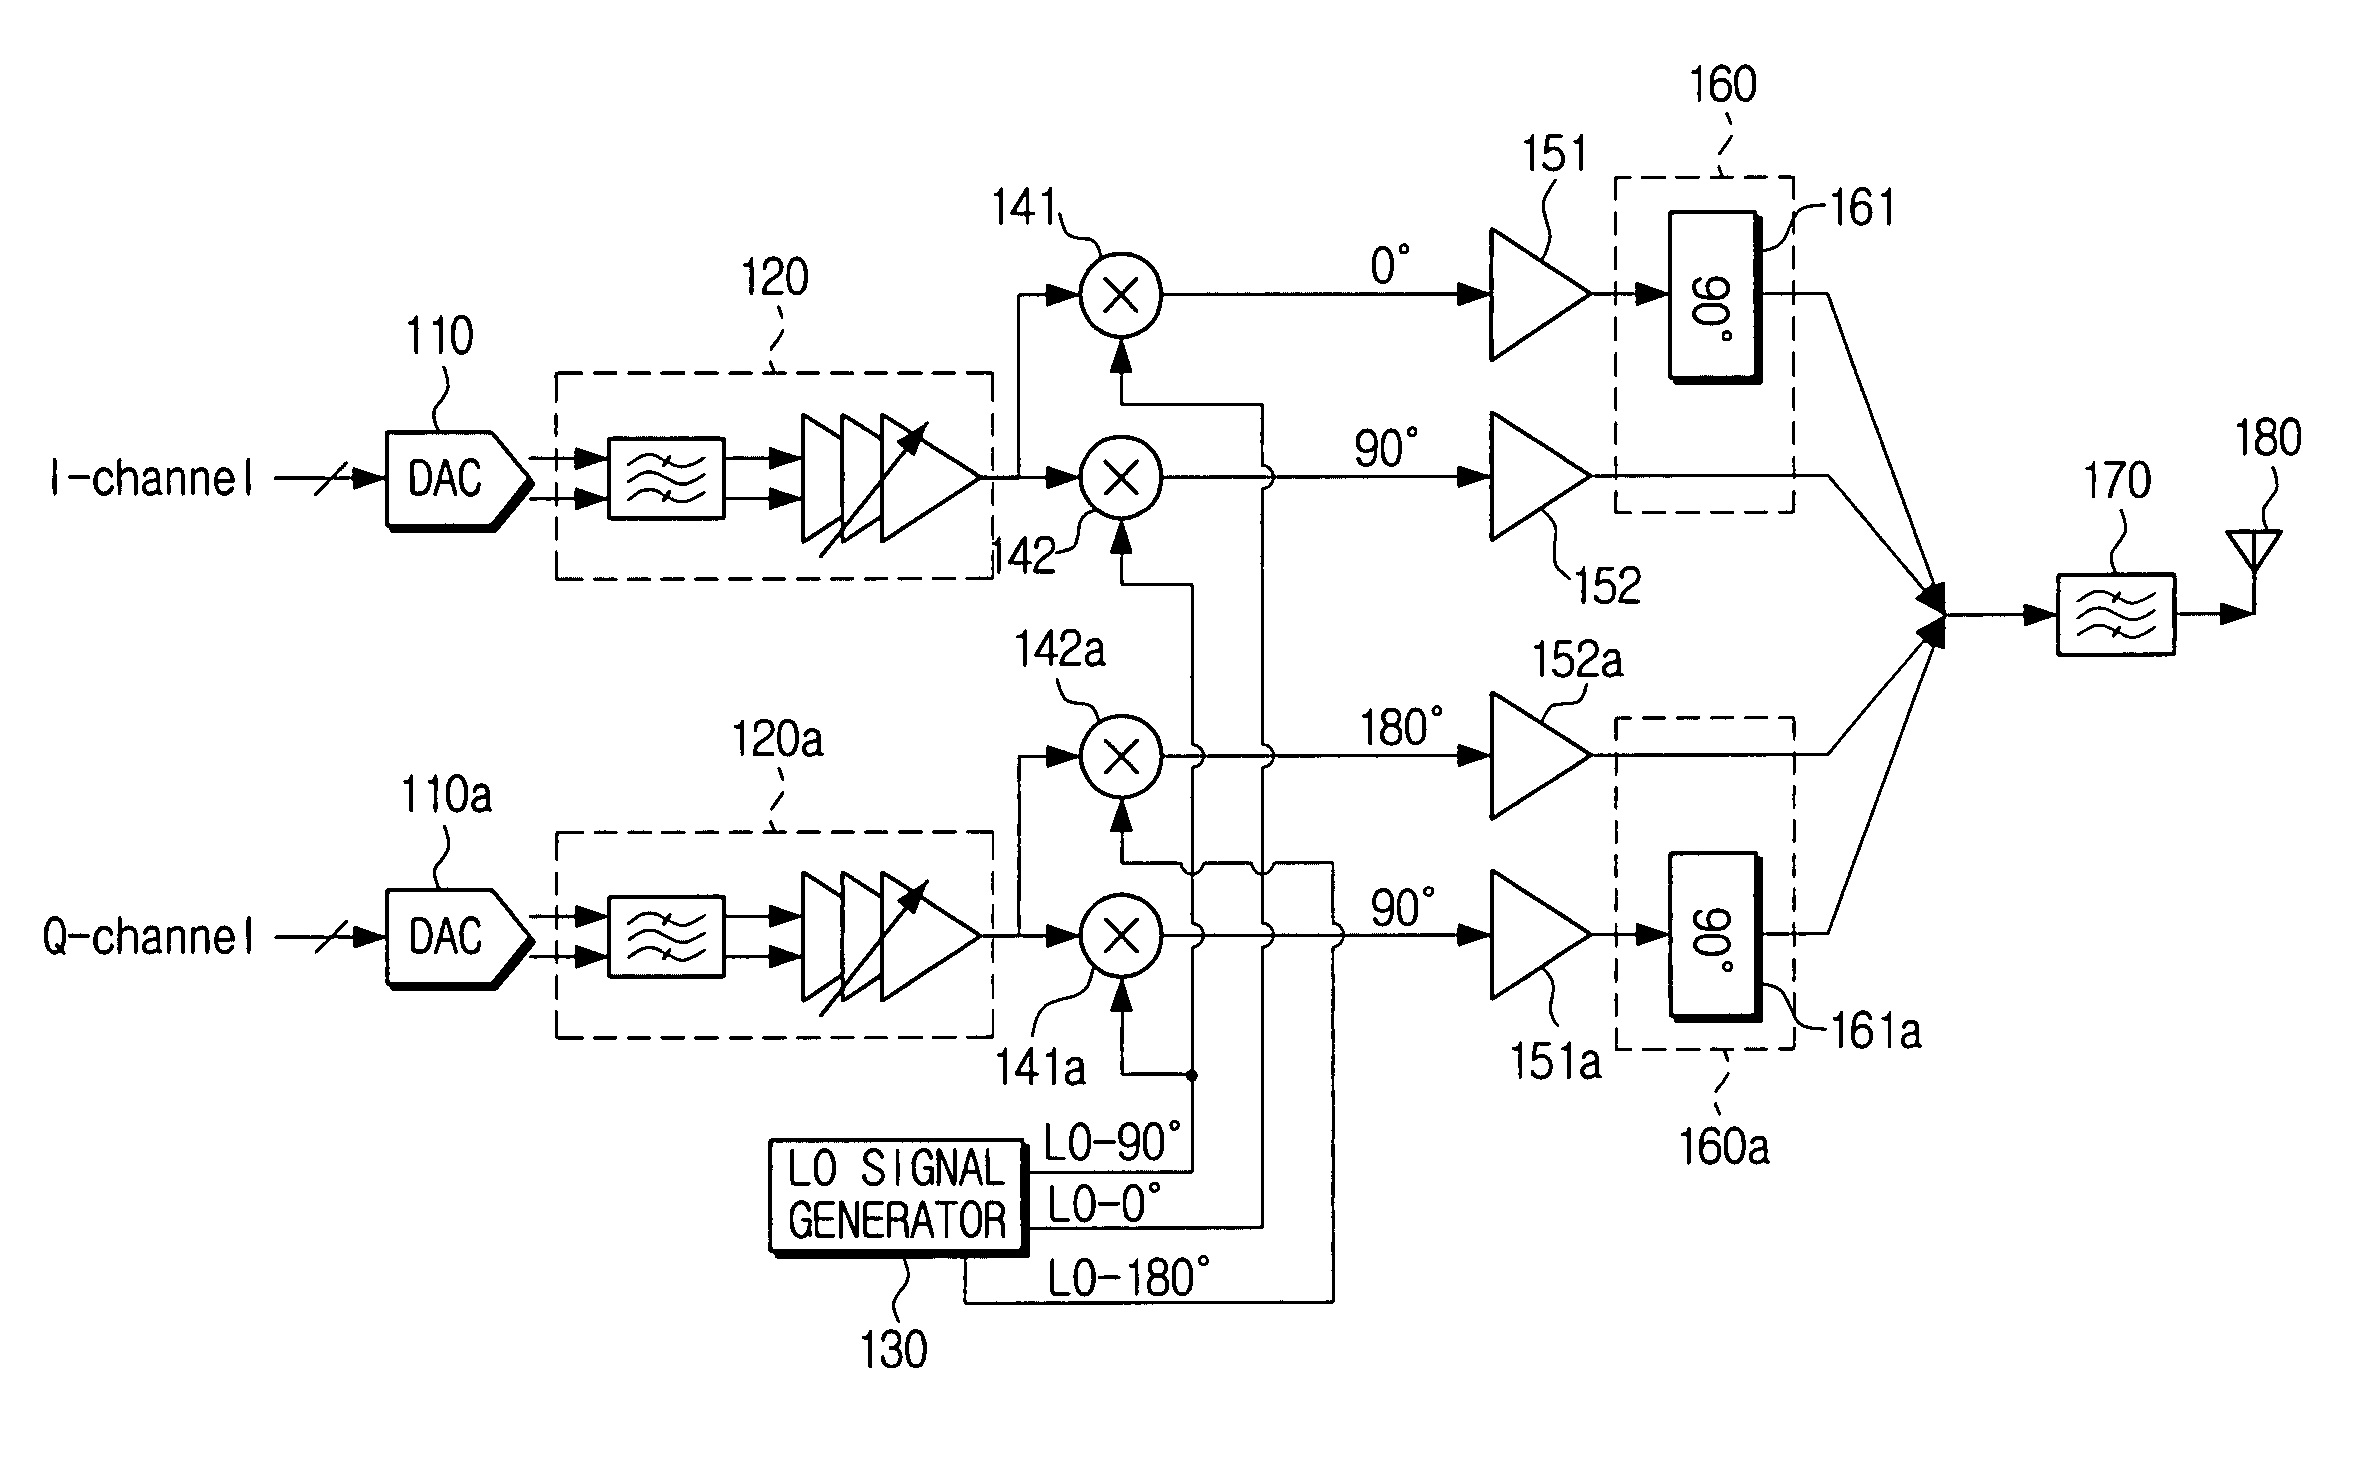 Doherty amplifier and transmitter using mixer